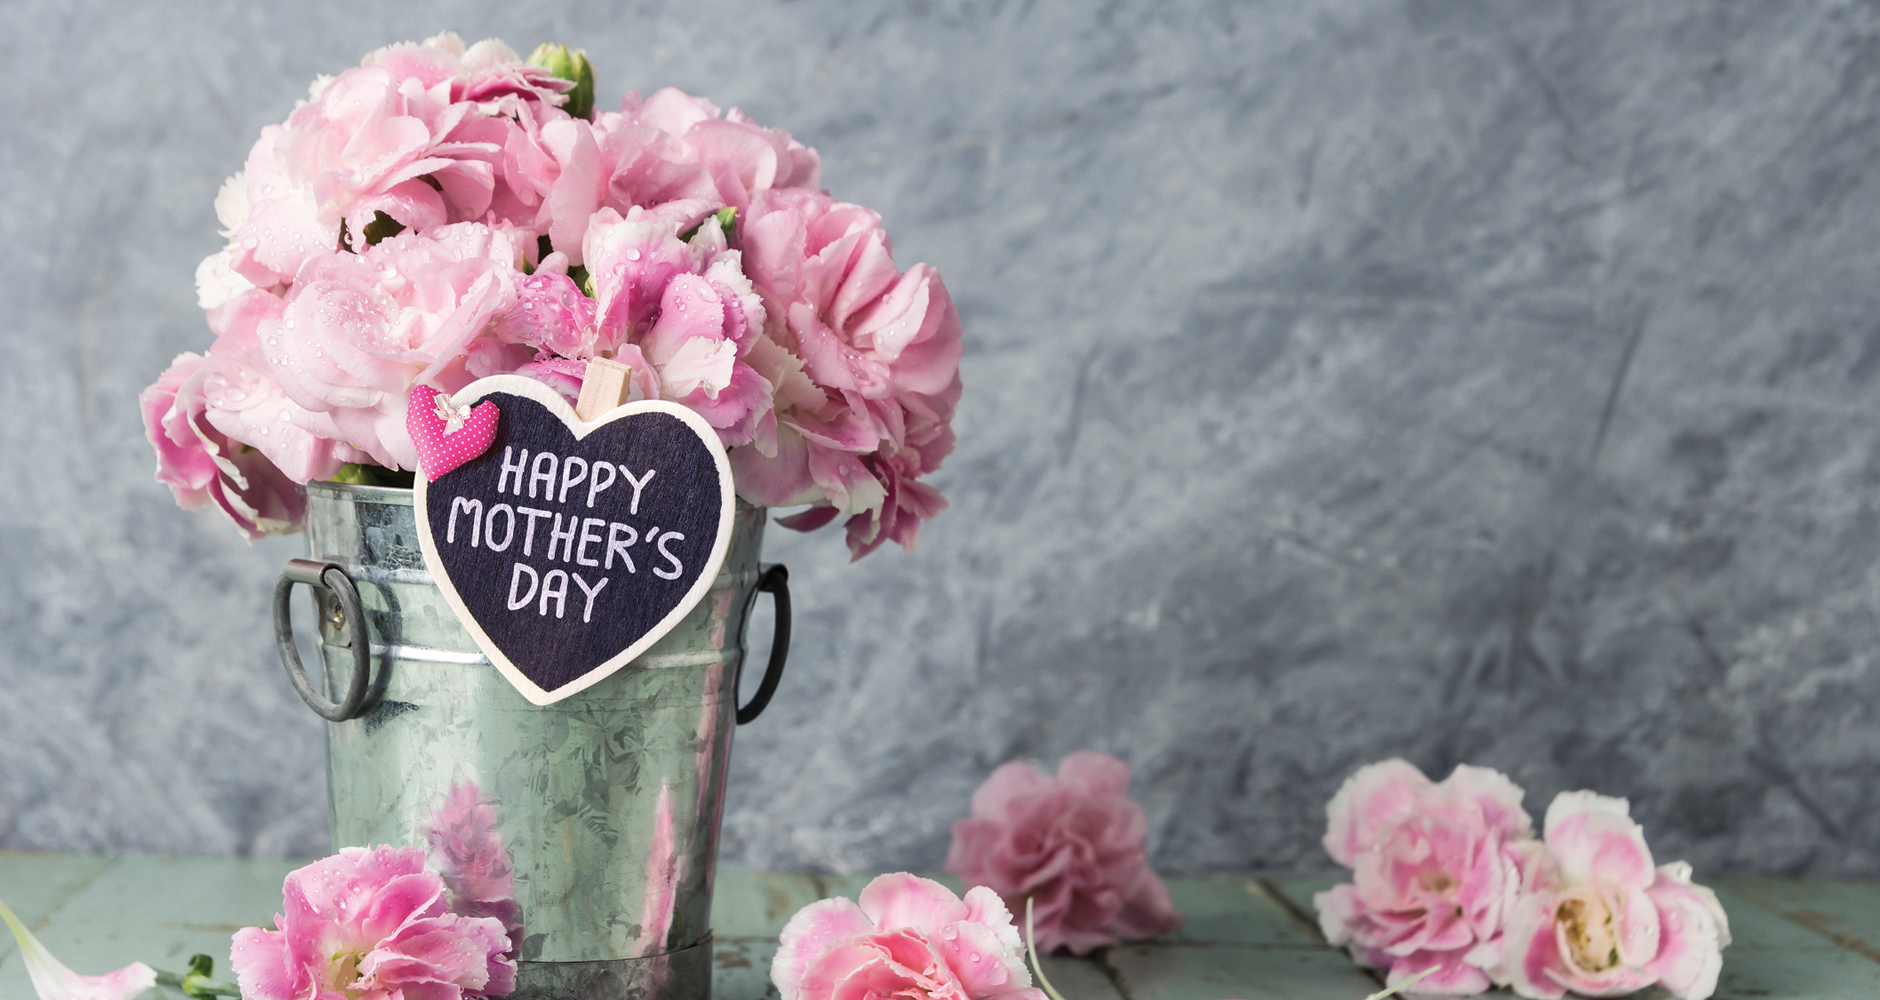 Have A Happy Mother's Day 2021: Facts, Folklore, Recipes, and Ideas